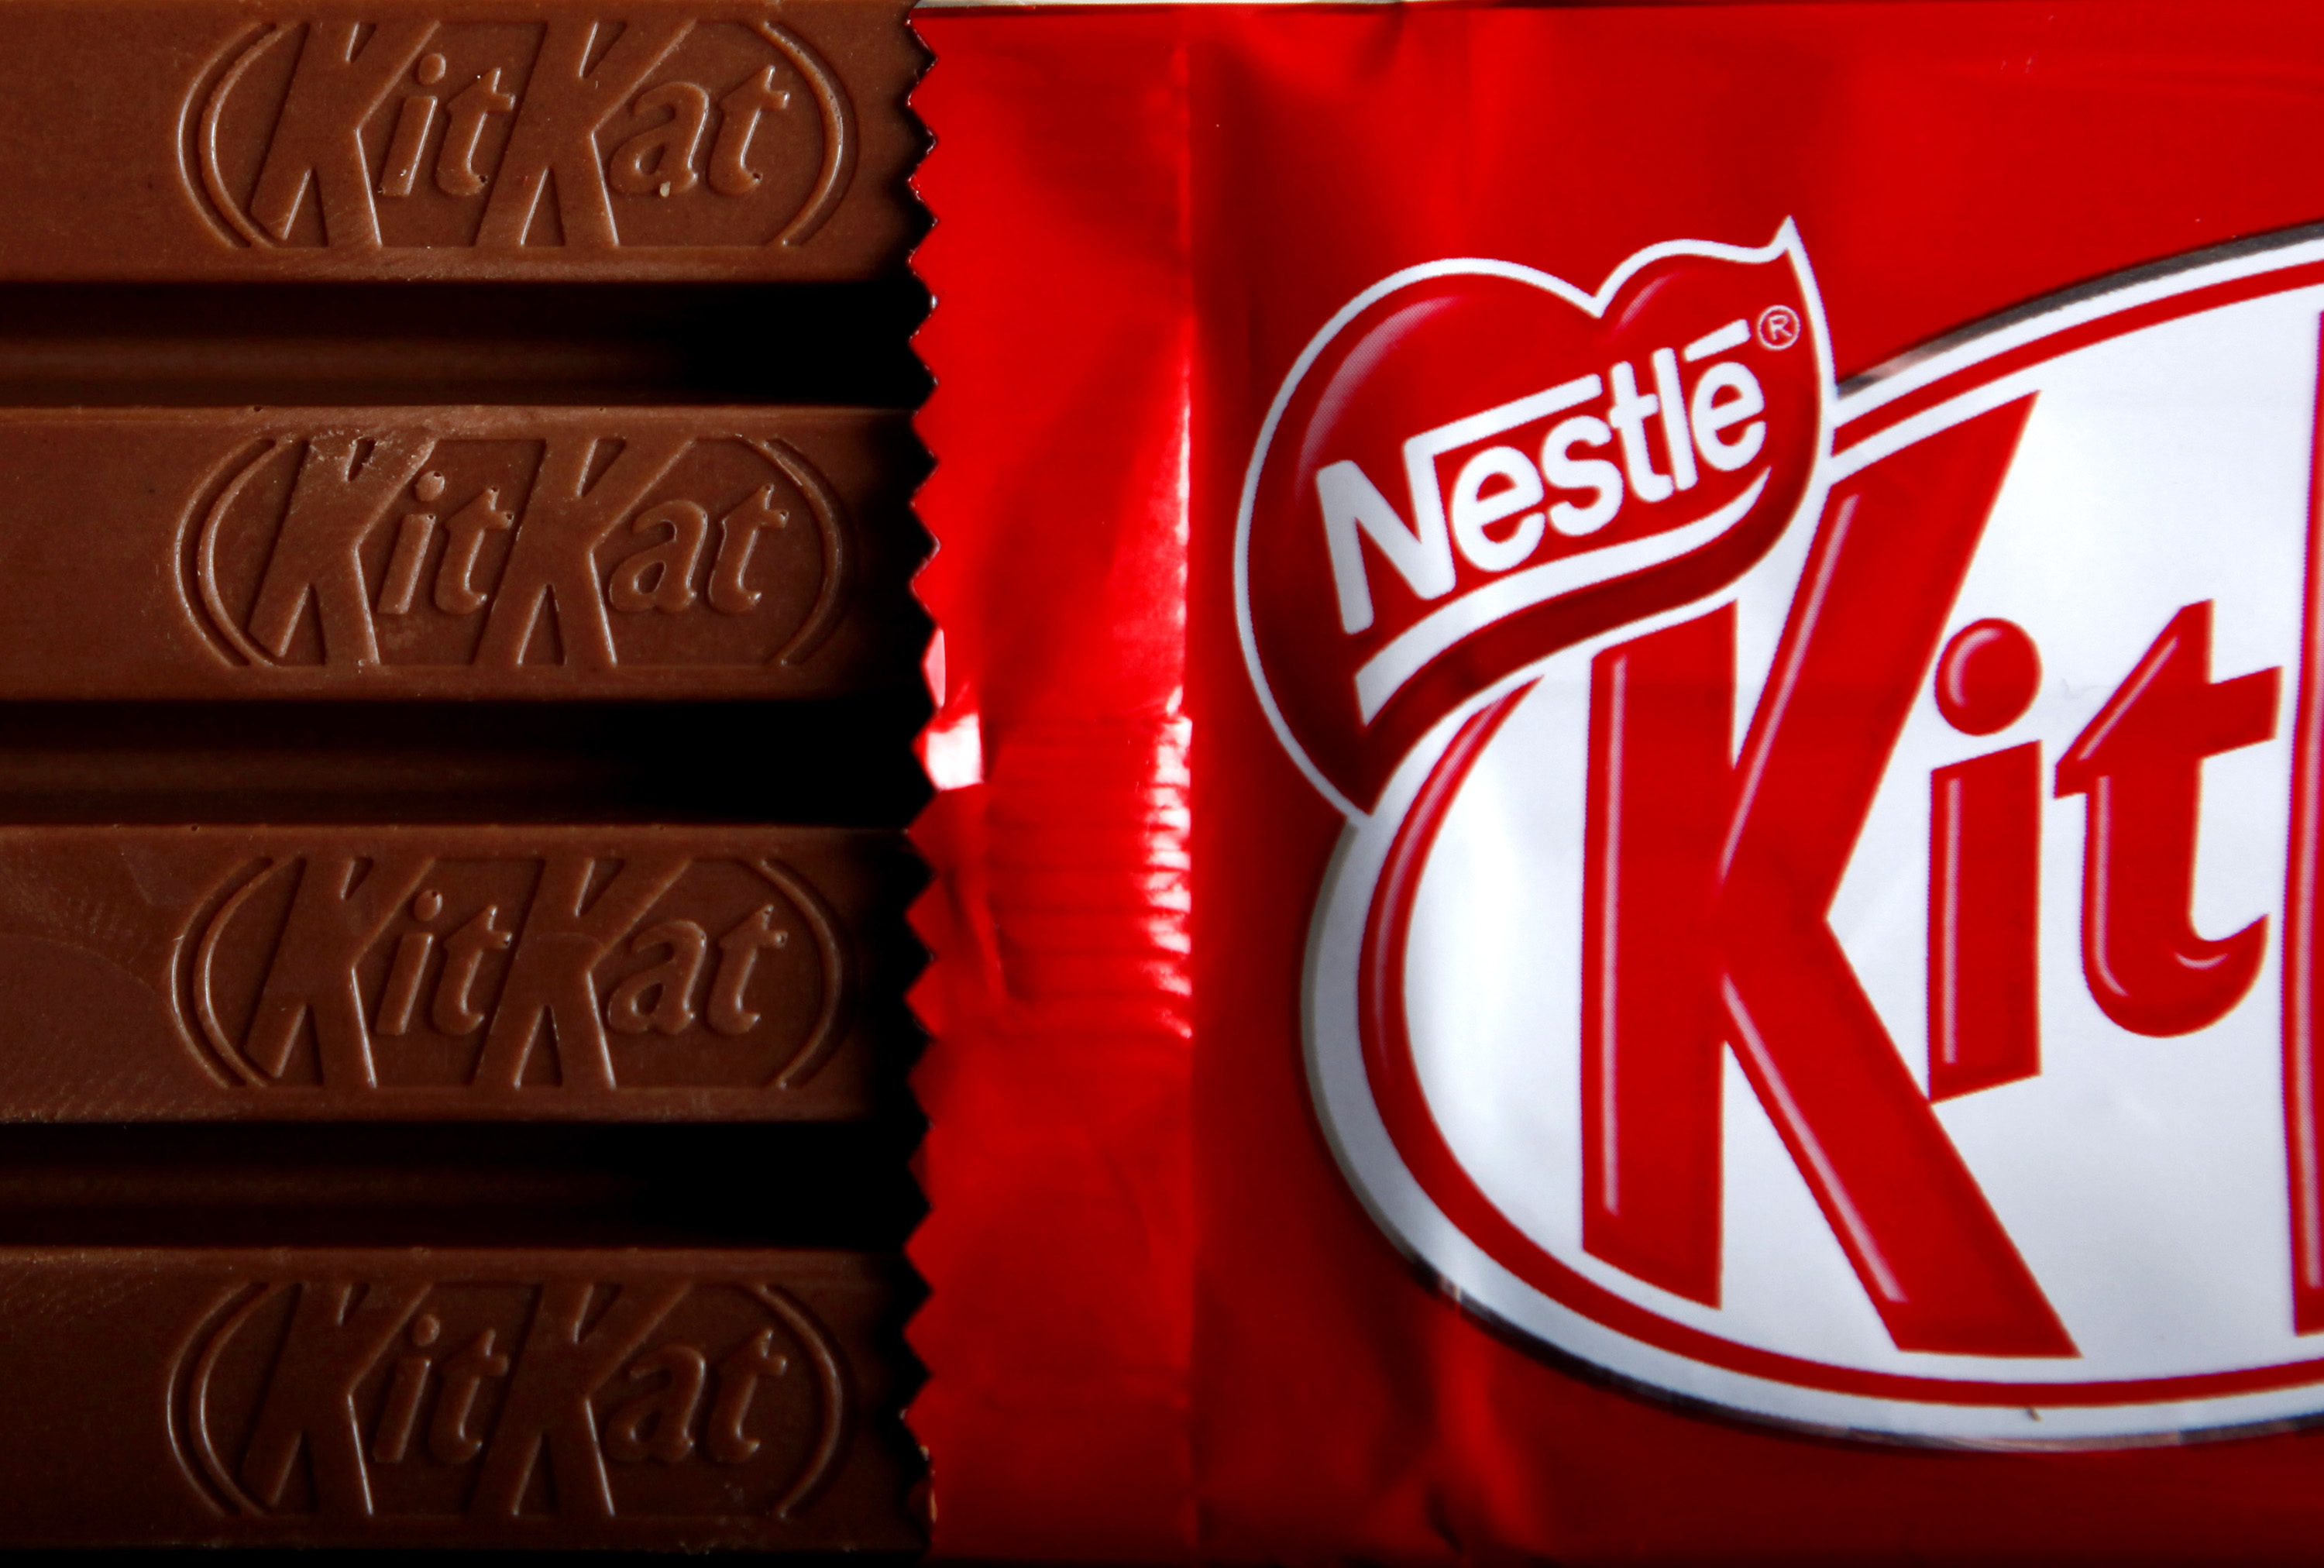 Bars of original KitKat chocolate, produced by Nestle SA, and without the "Fairtrade" logo sit arranged for a photograph in London, U.K., on Monday, Dec.7, 2009. Nestle SA, the world's biggest food company, will start certifying some KitKat bars in the U.K. and Ireland as Fairtrade, following Cadbury Plc, which started producing mass-market Fairtrade chocolate this year. (Bloomberg via Getty Images)